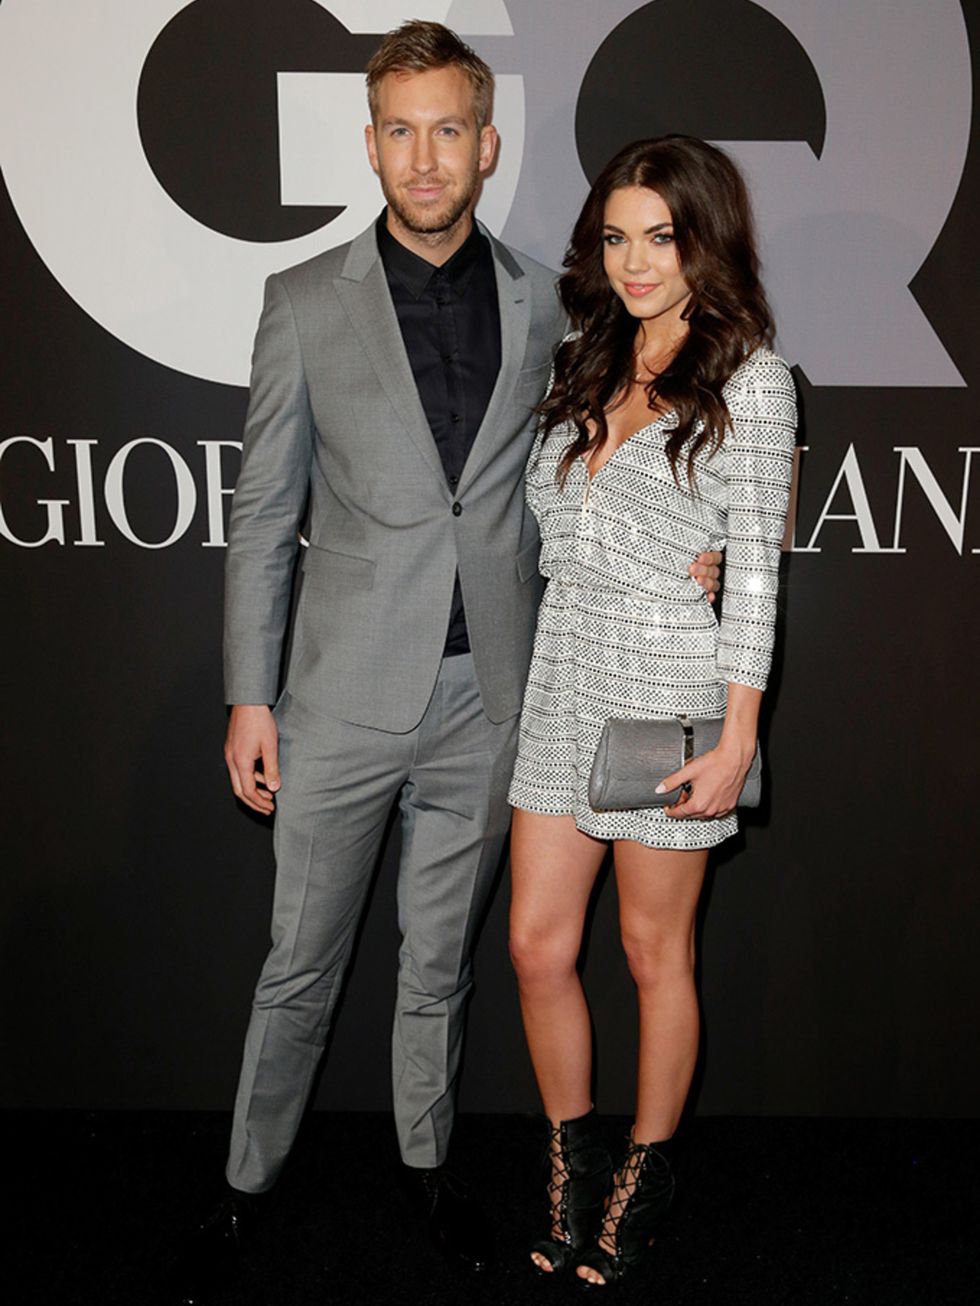 Calvin Harris and Aarika Wolf attend GQ And Giorgio Armani's Grammys After Party, February 2015.